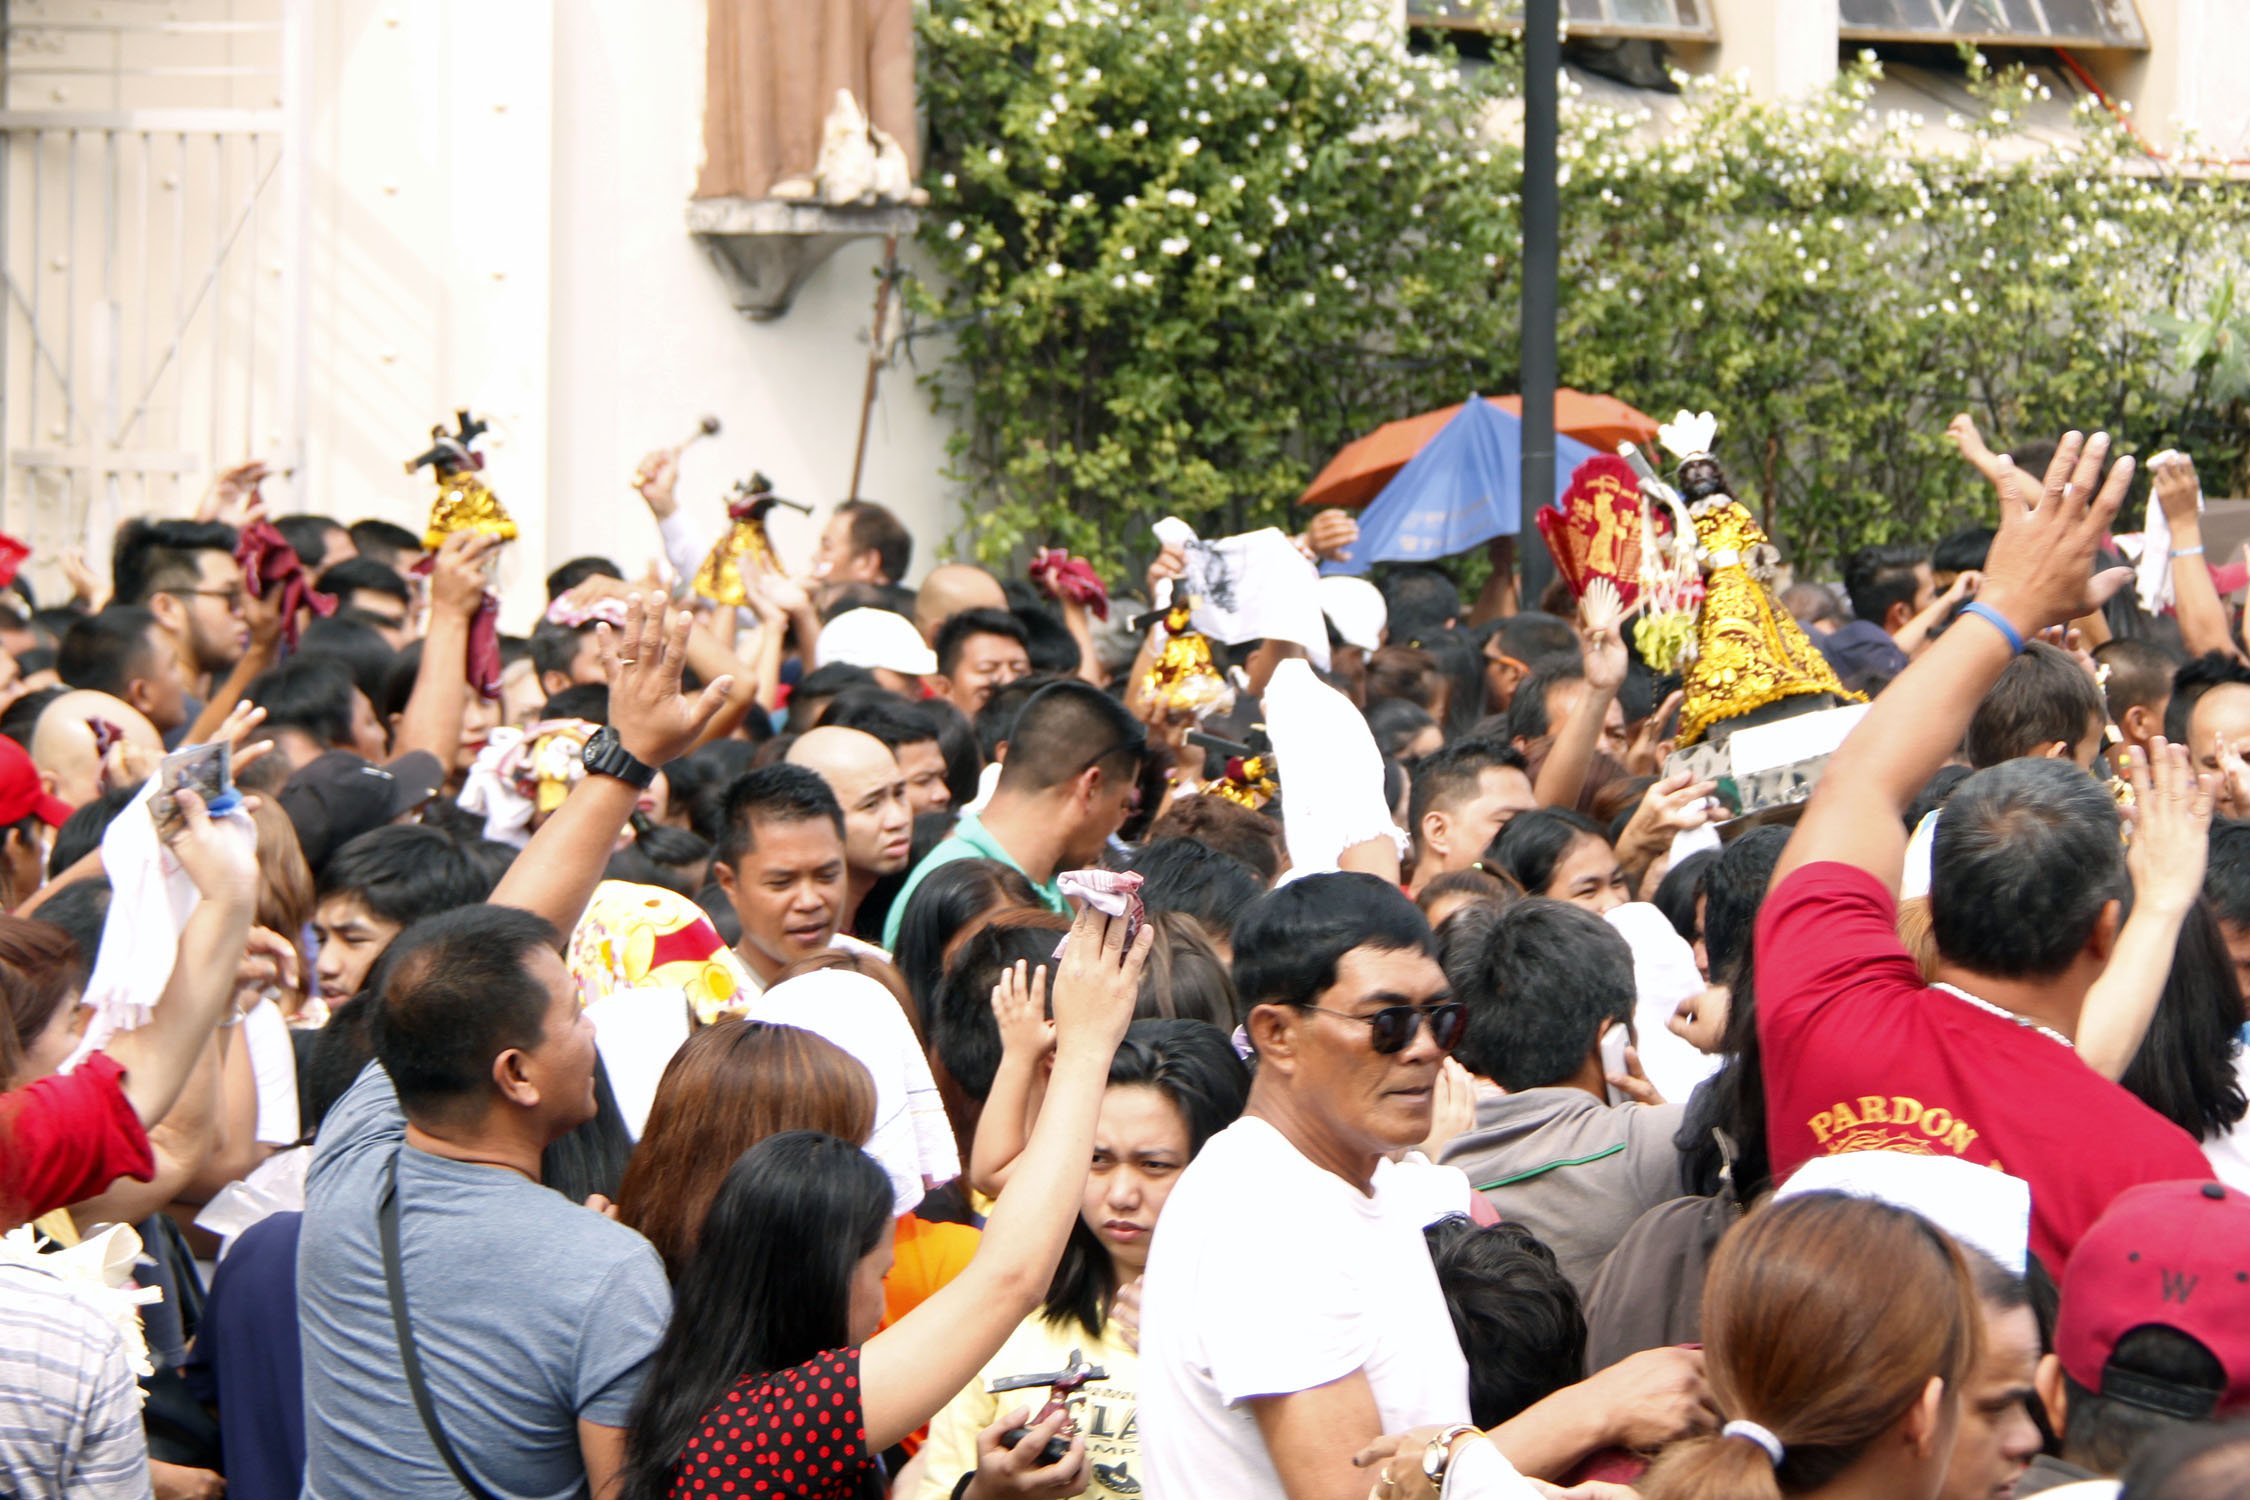 Mass Blessing of Images of the Black Nazarene at Quiapo church